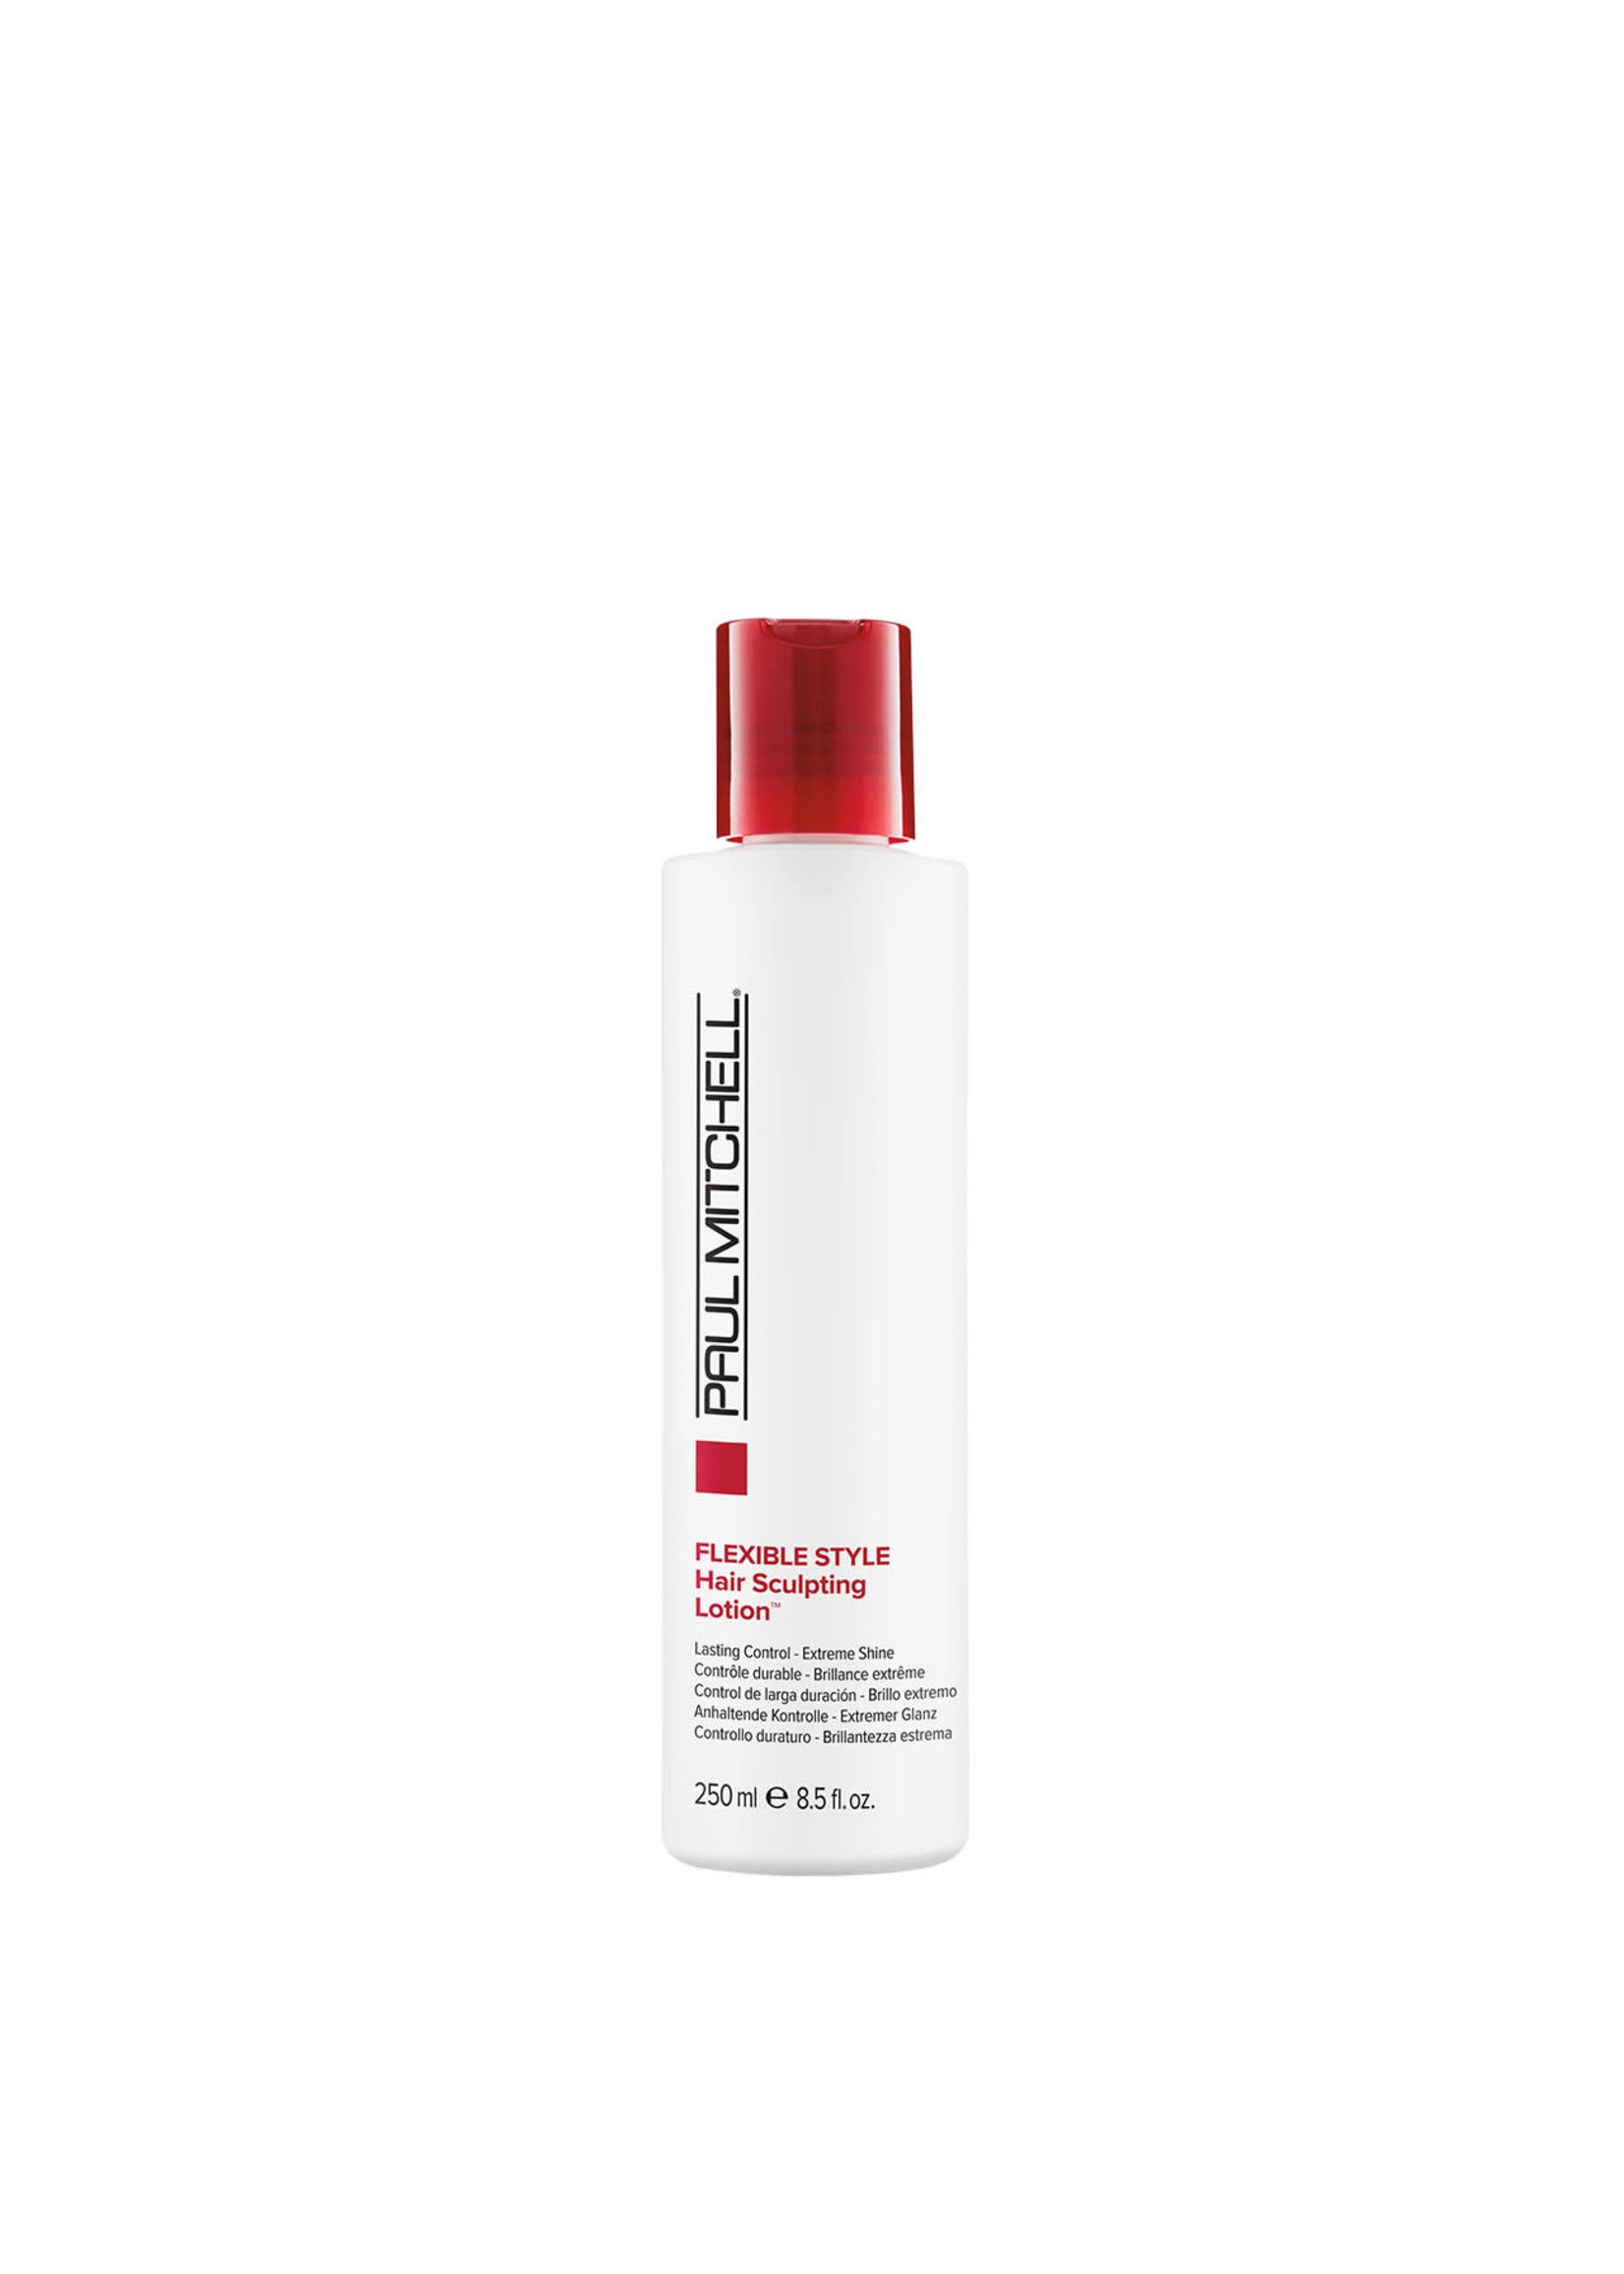 Paul Mitchell Paul Mitchell Flexible Style Hair Sculpting Lotion 250ml